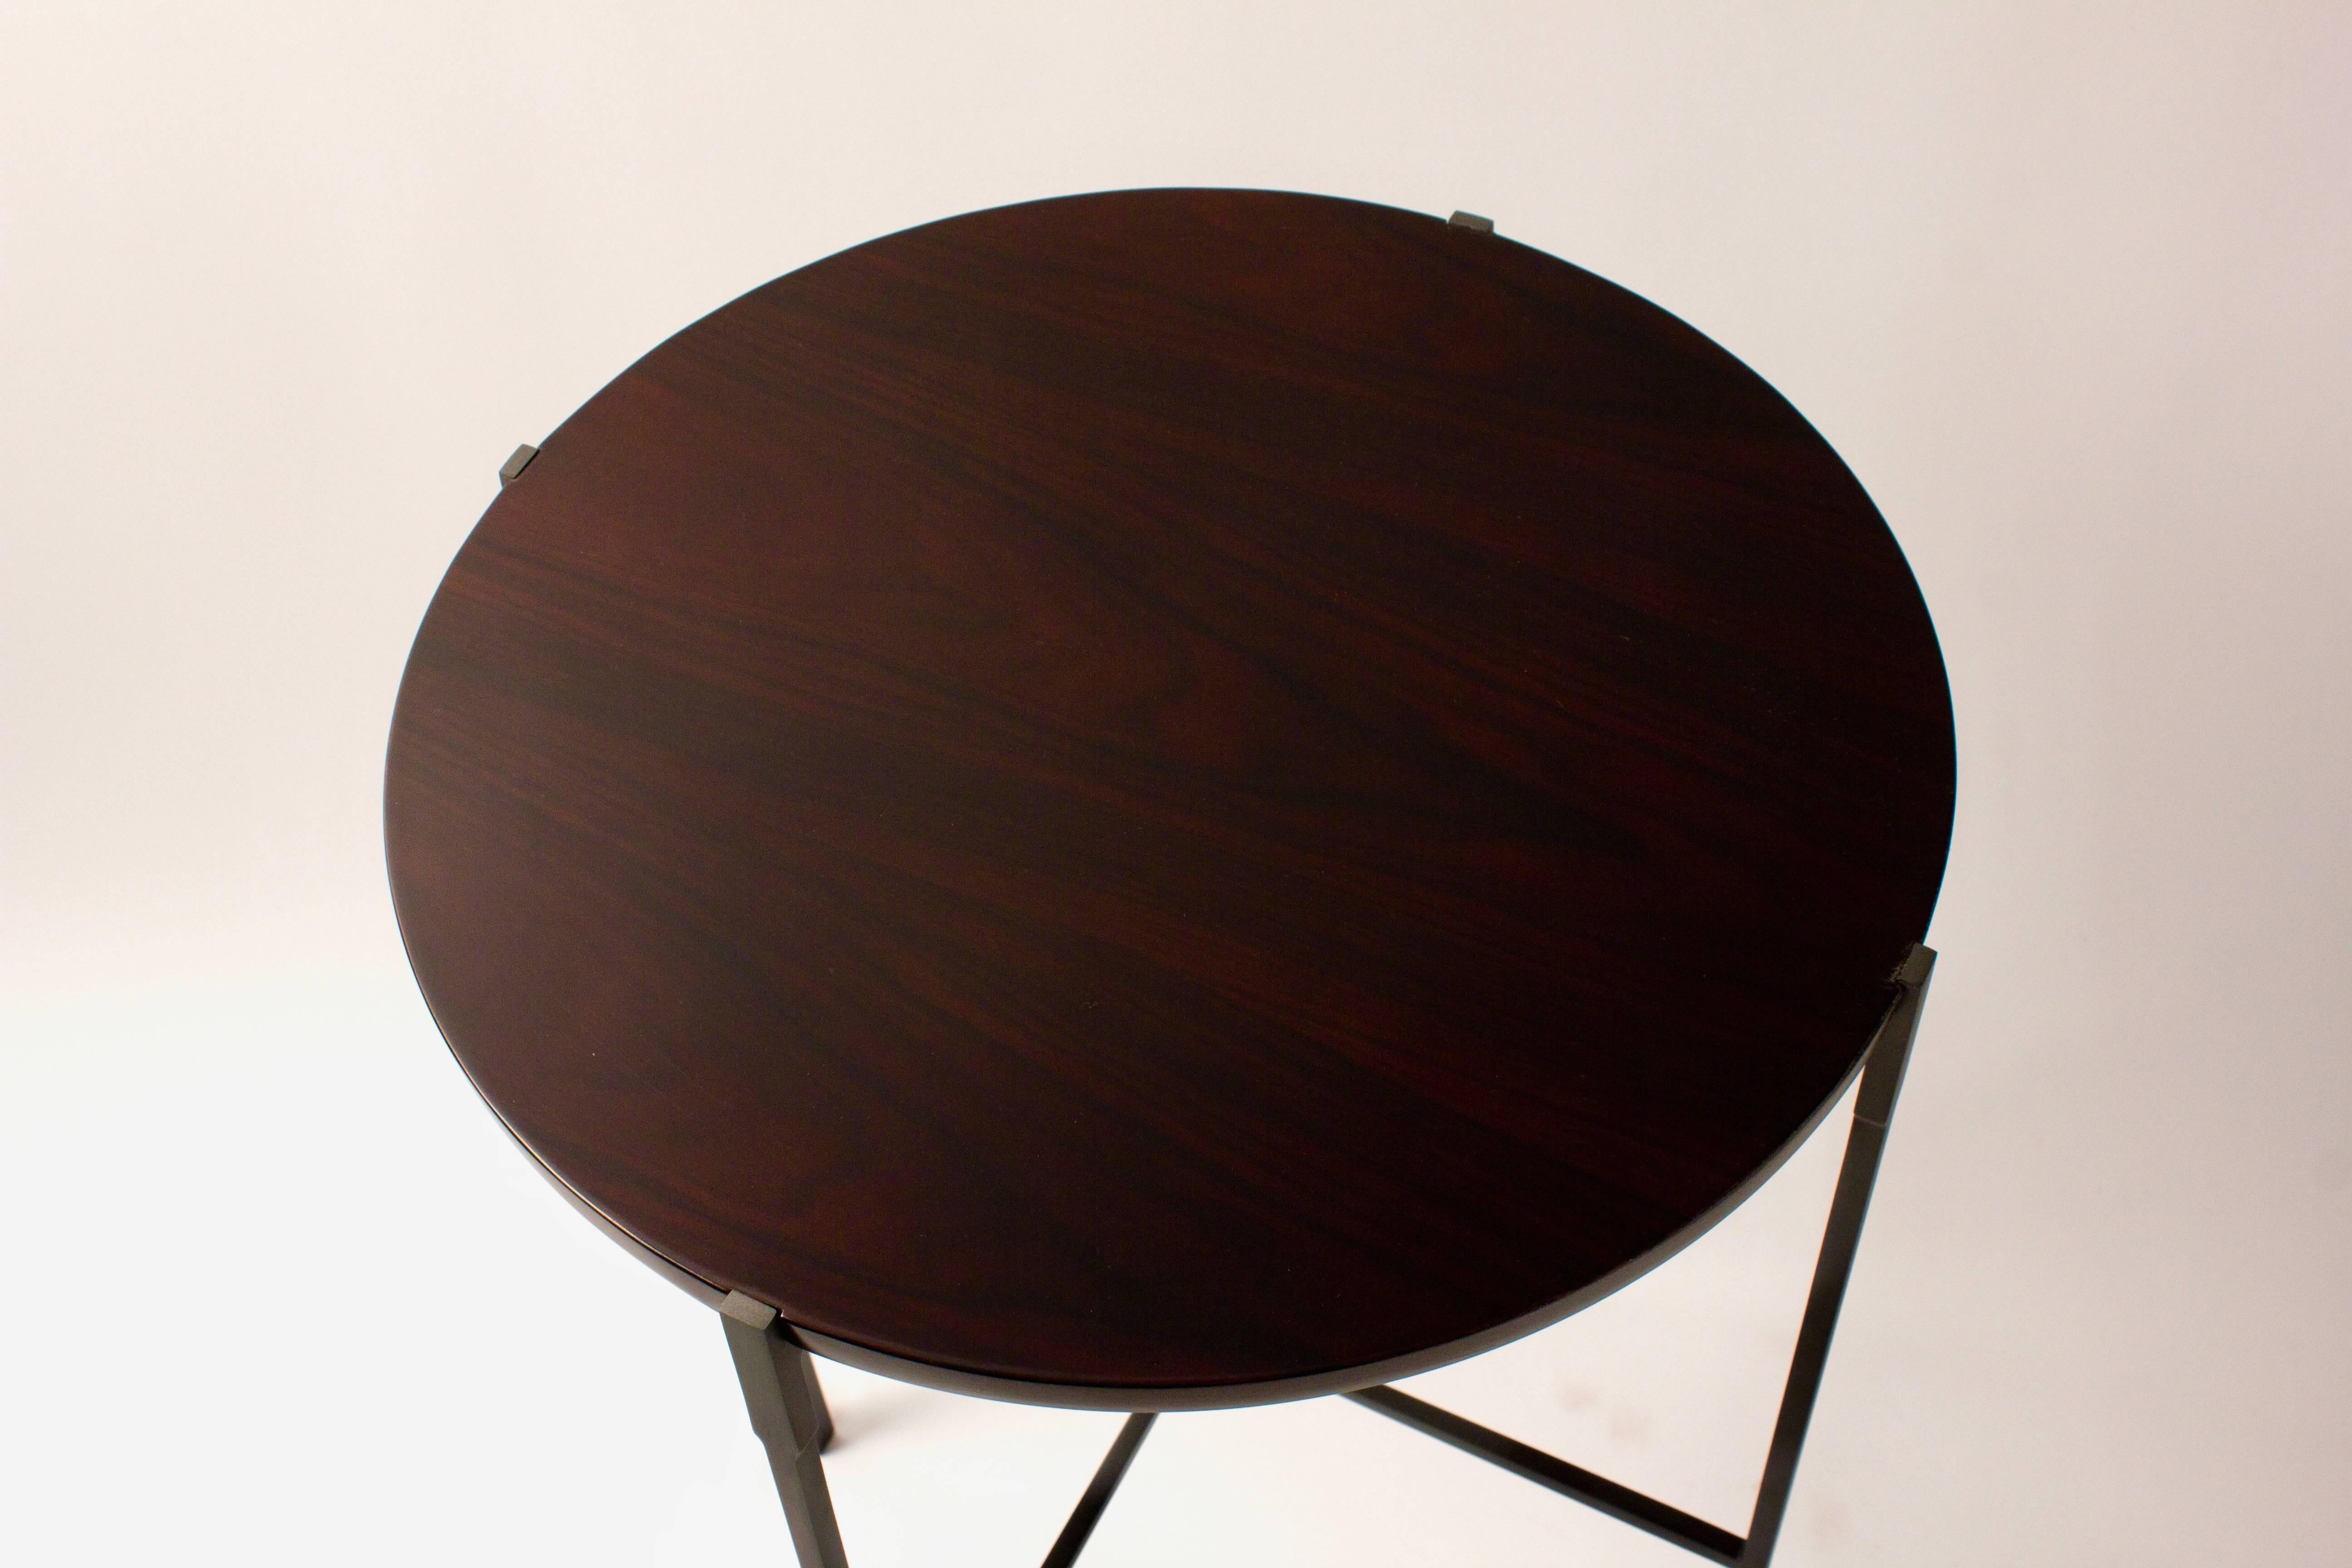 Bronze round side table
Legs structure in bronze and rosewood top
Top super glossy

Dimensions:
H 64 cm x D 46 cm.

